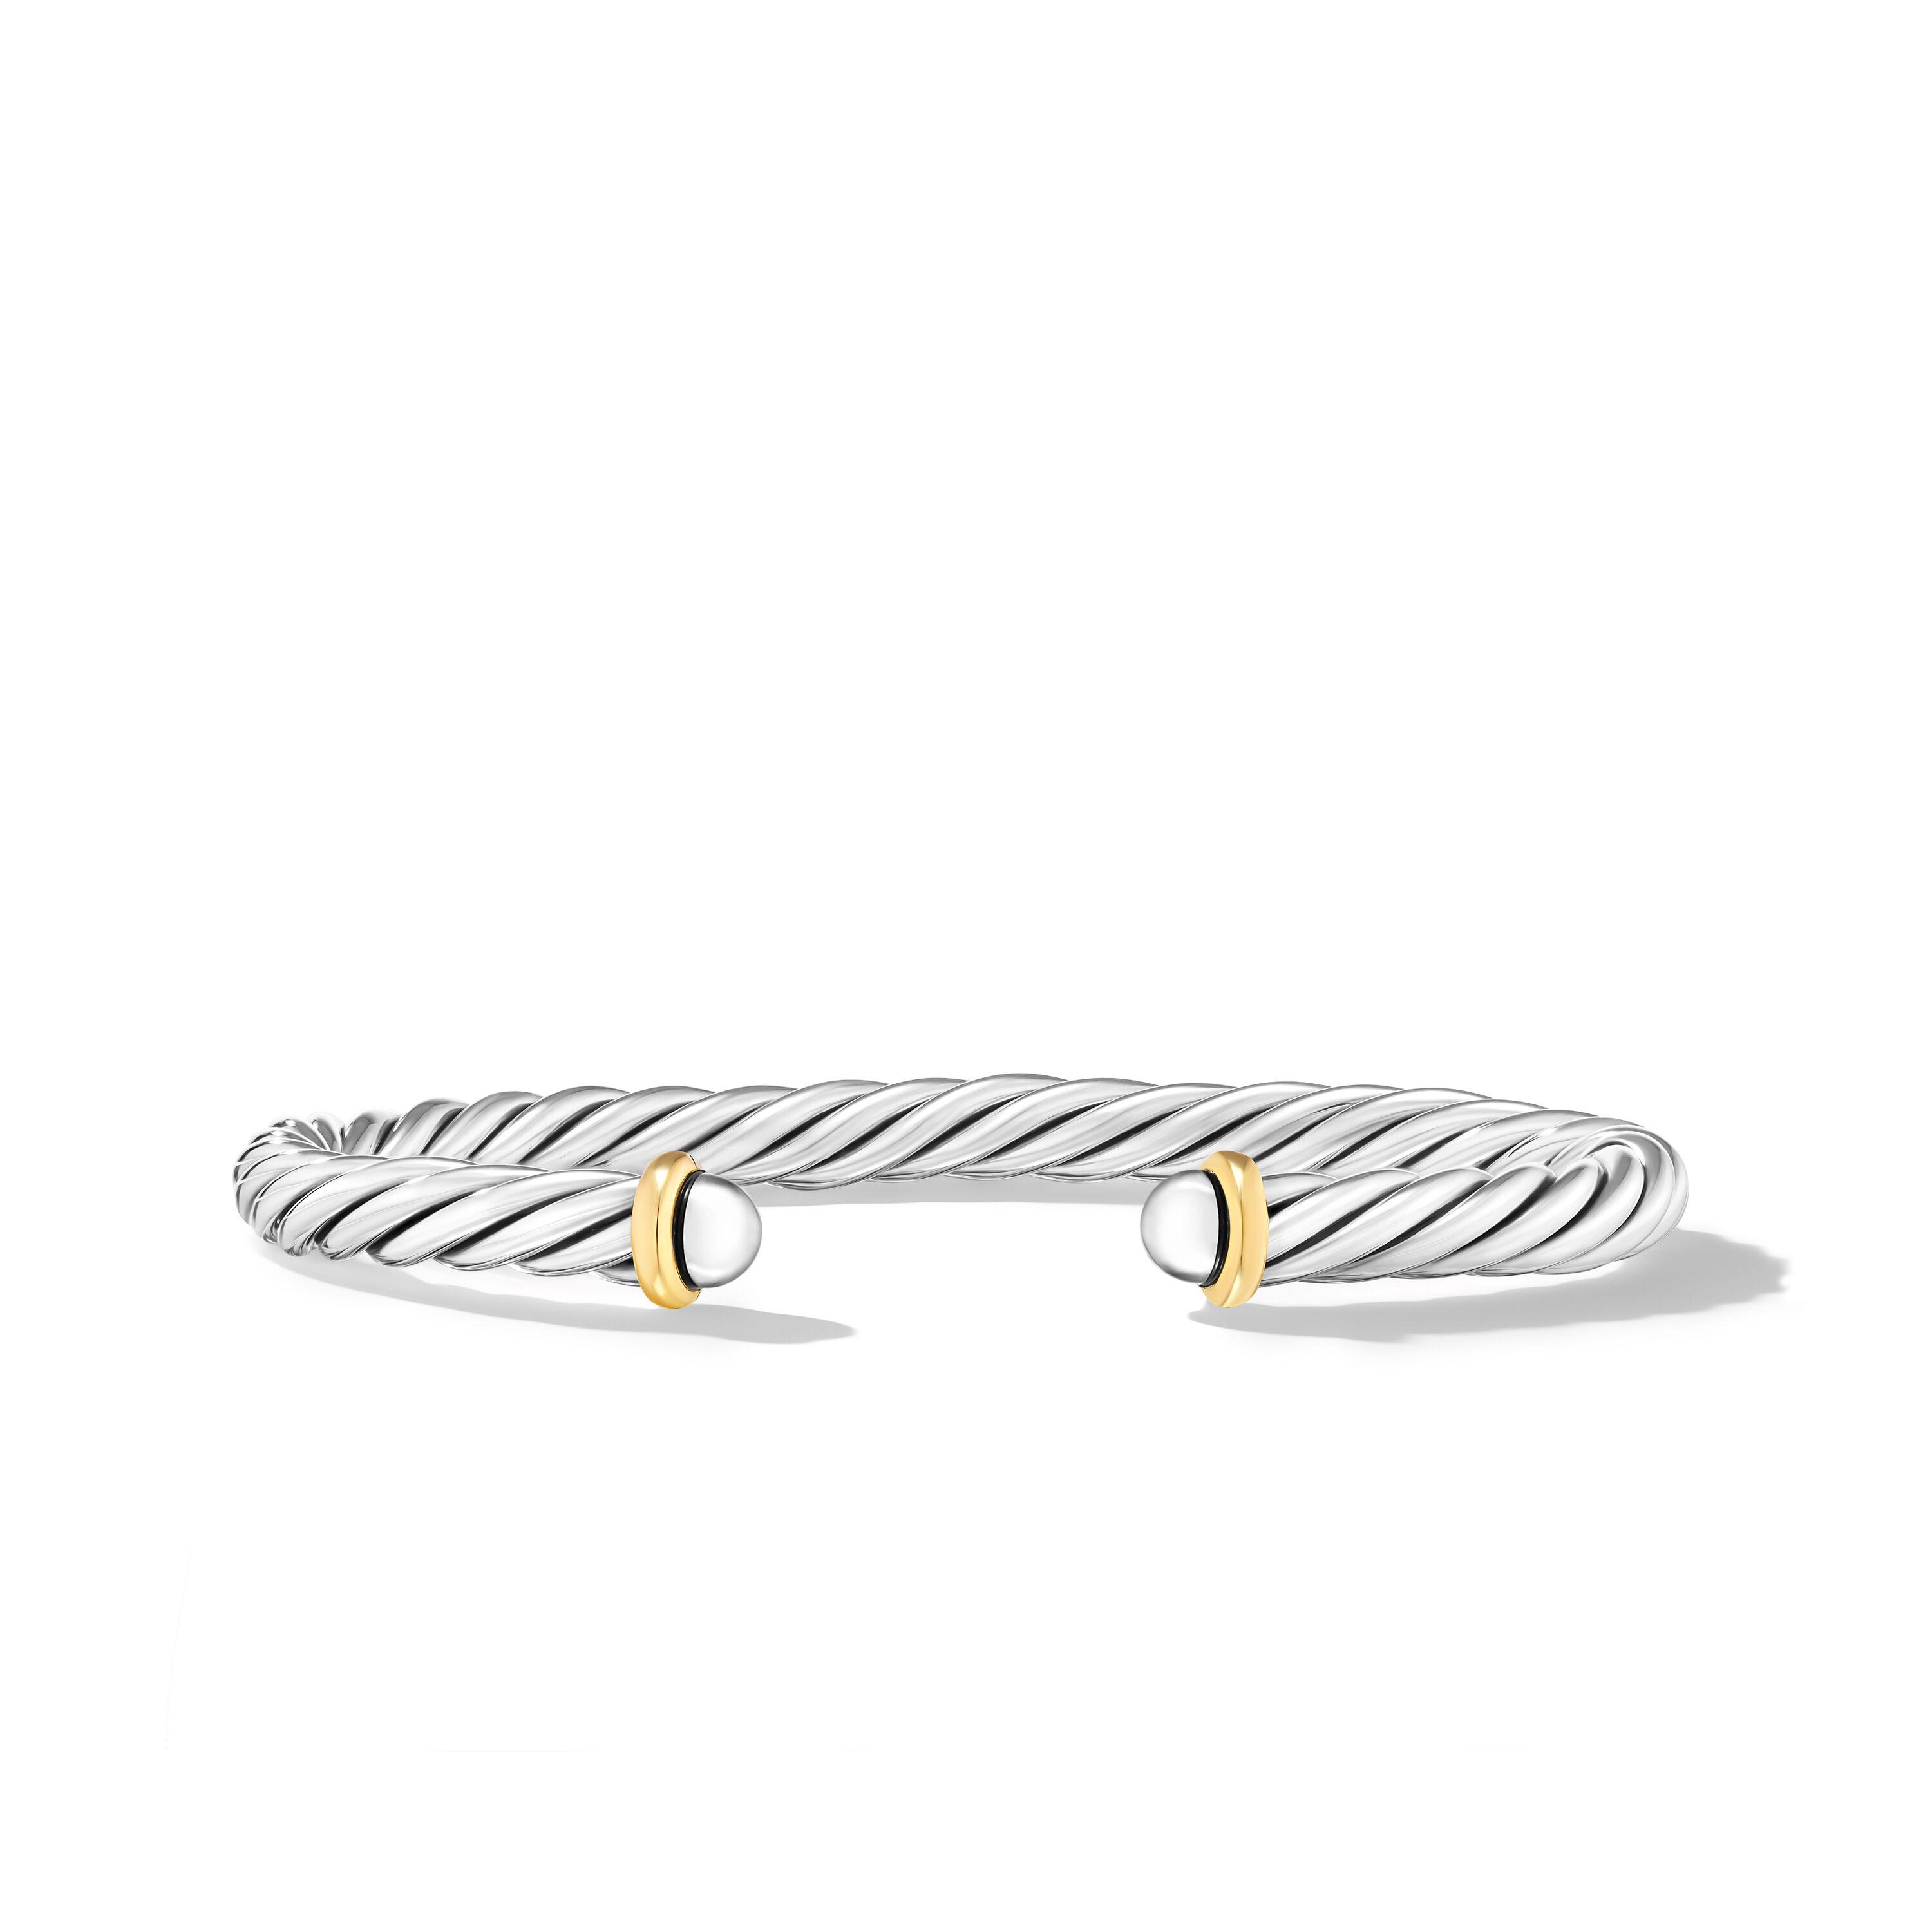 David Yurman 6mm Cable Cuff Bracelet in Sterling Silver with 14K Yellow Gold, Large